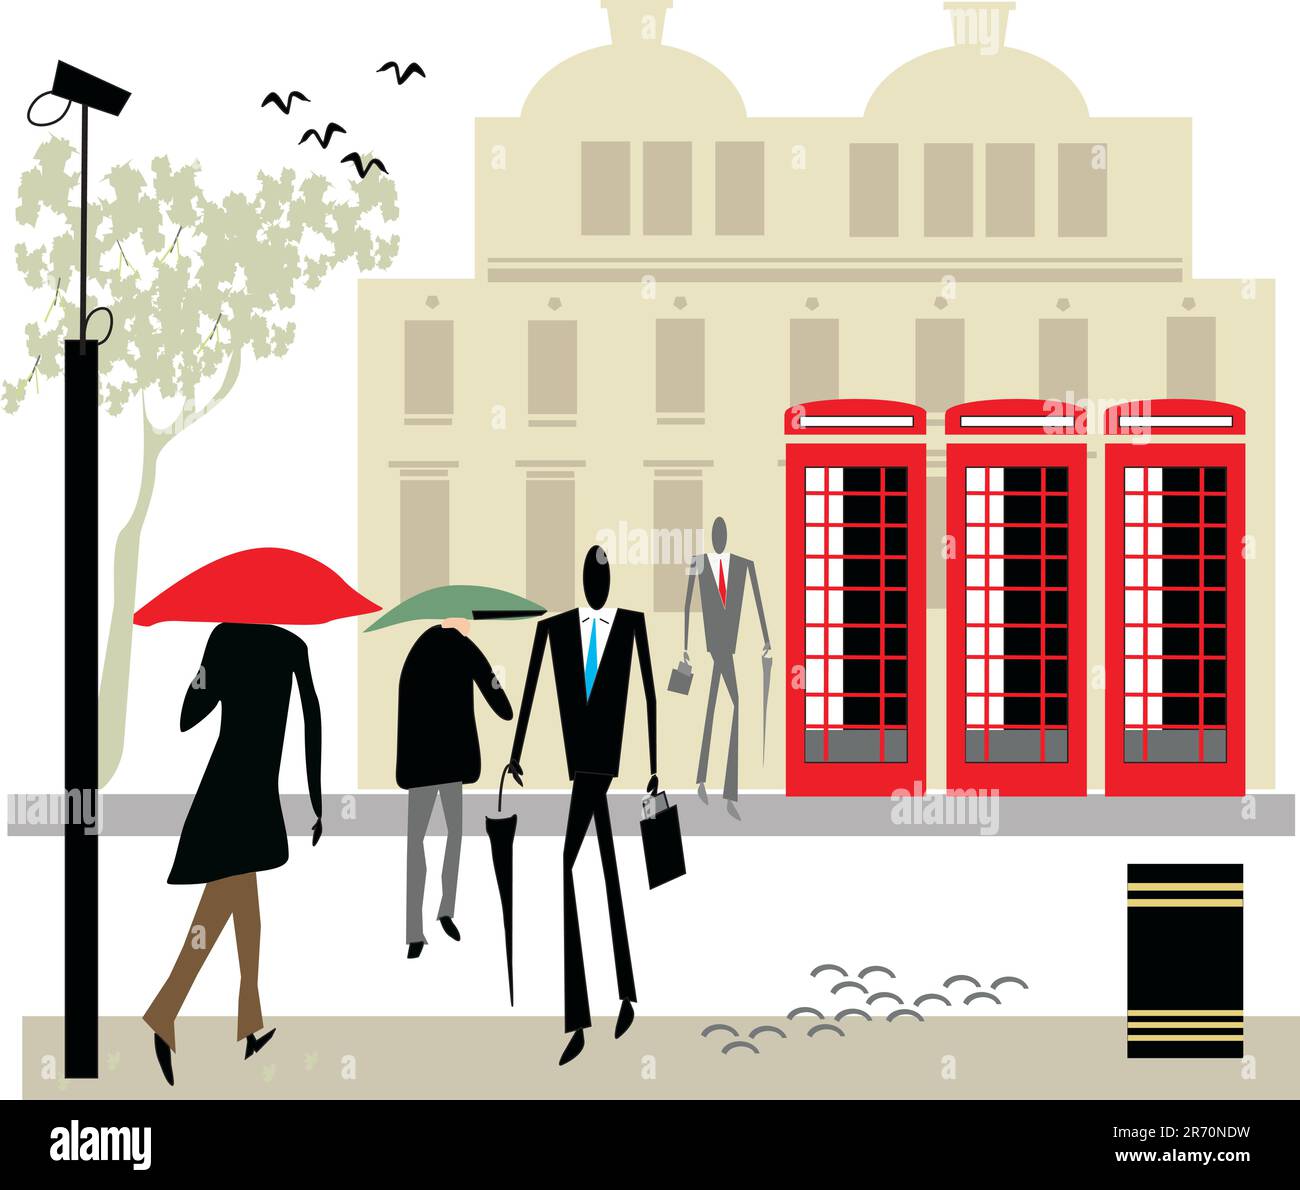 Vector illustration of people with umbrellas and English telephone booths. Stock Vector